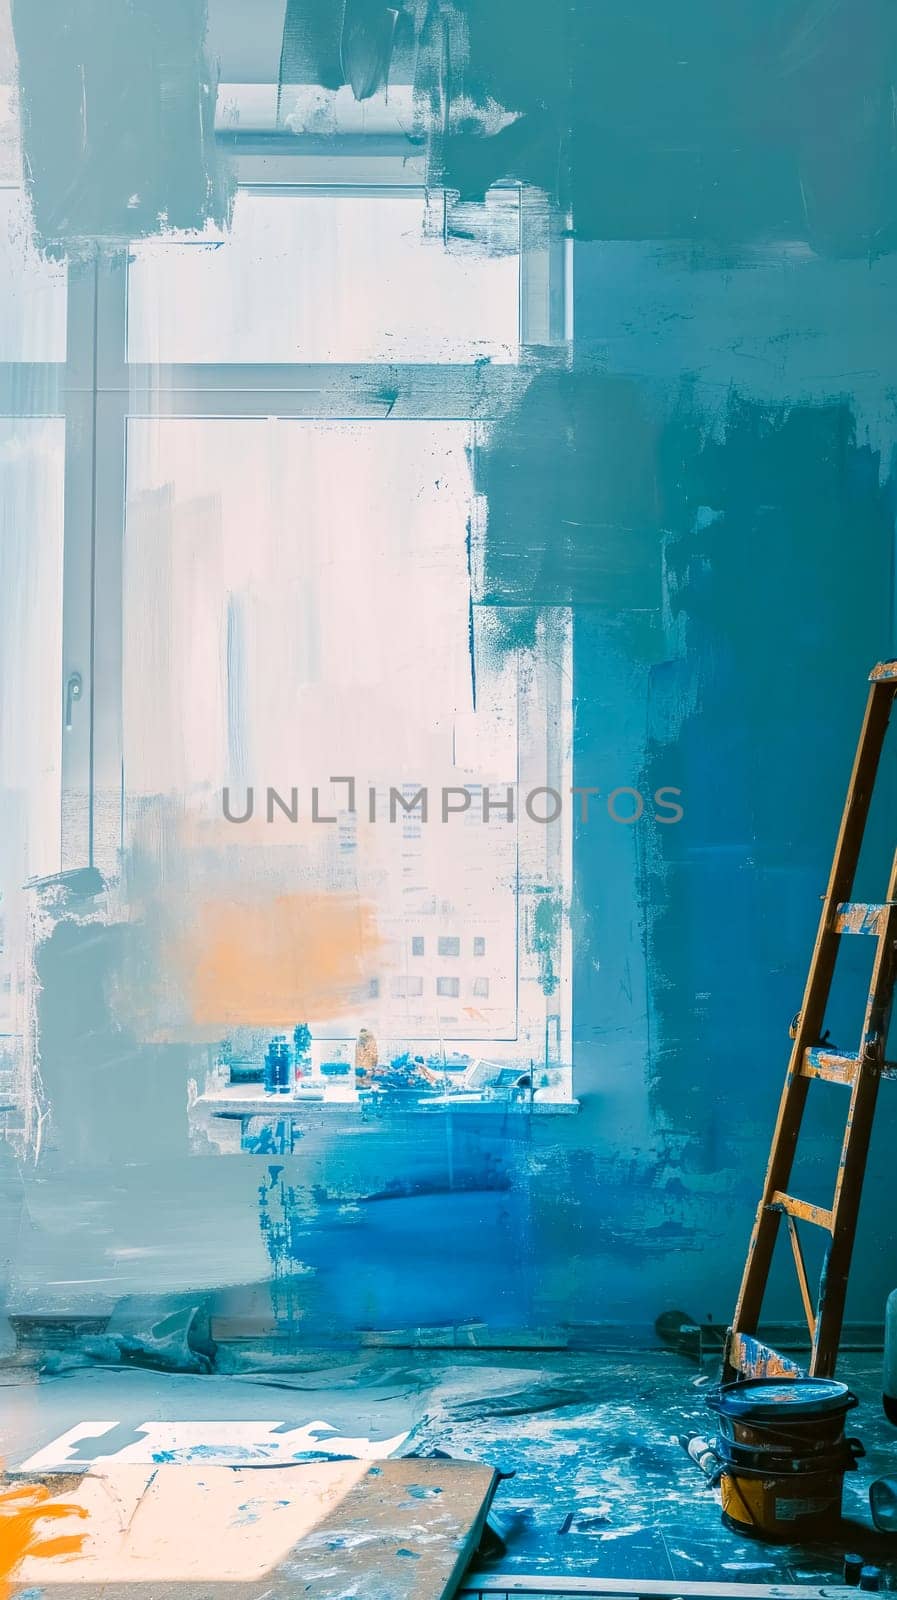 painting scene within an indoor setting. strokes of blue and white paint, a ladder, and a paint can in a room that seems to be under renovation or being creatively repurposed by Edophoto